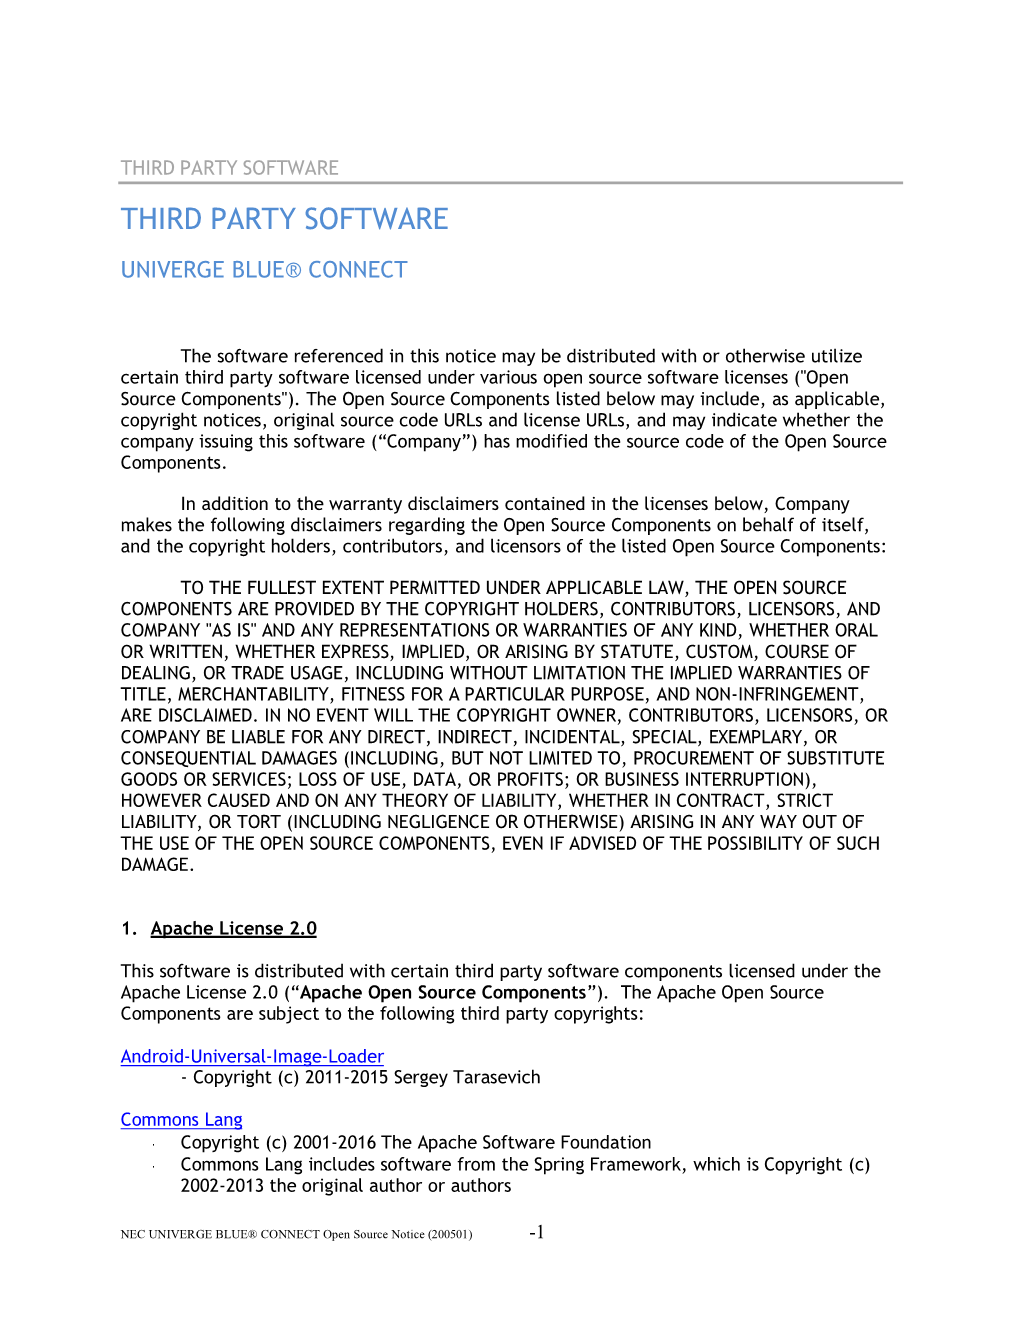 Open Source Notice (200501) -1 THIRD PARTY SOFTWARE